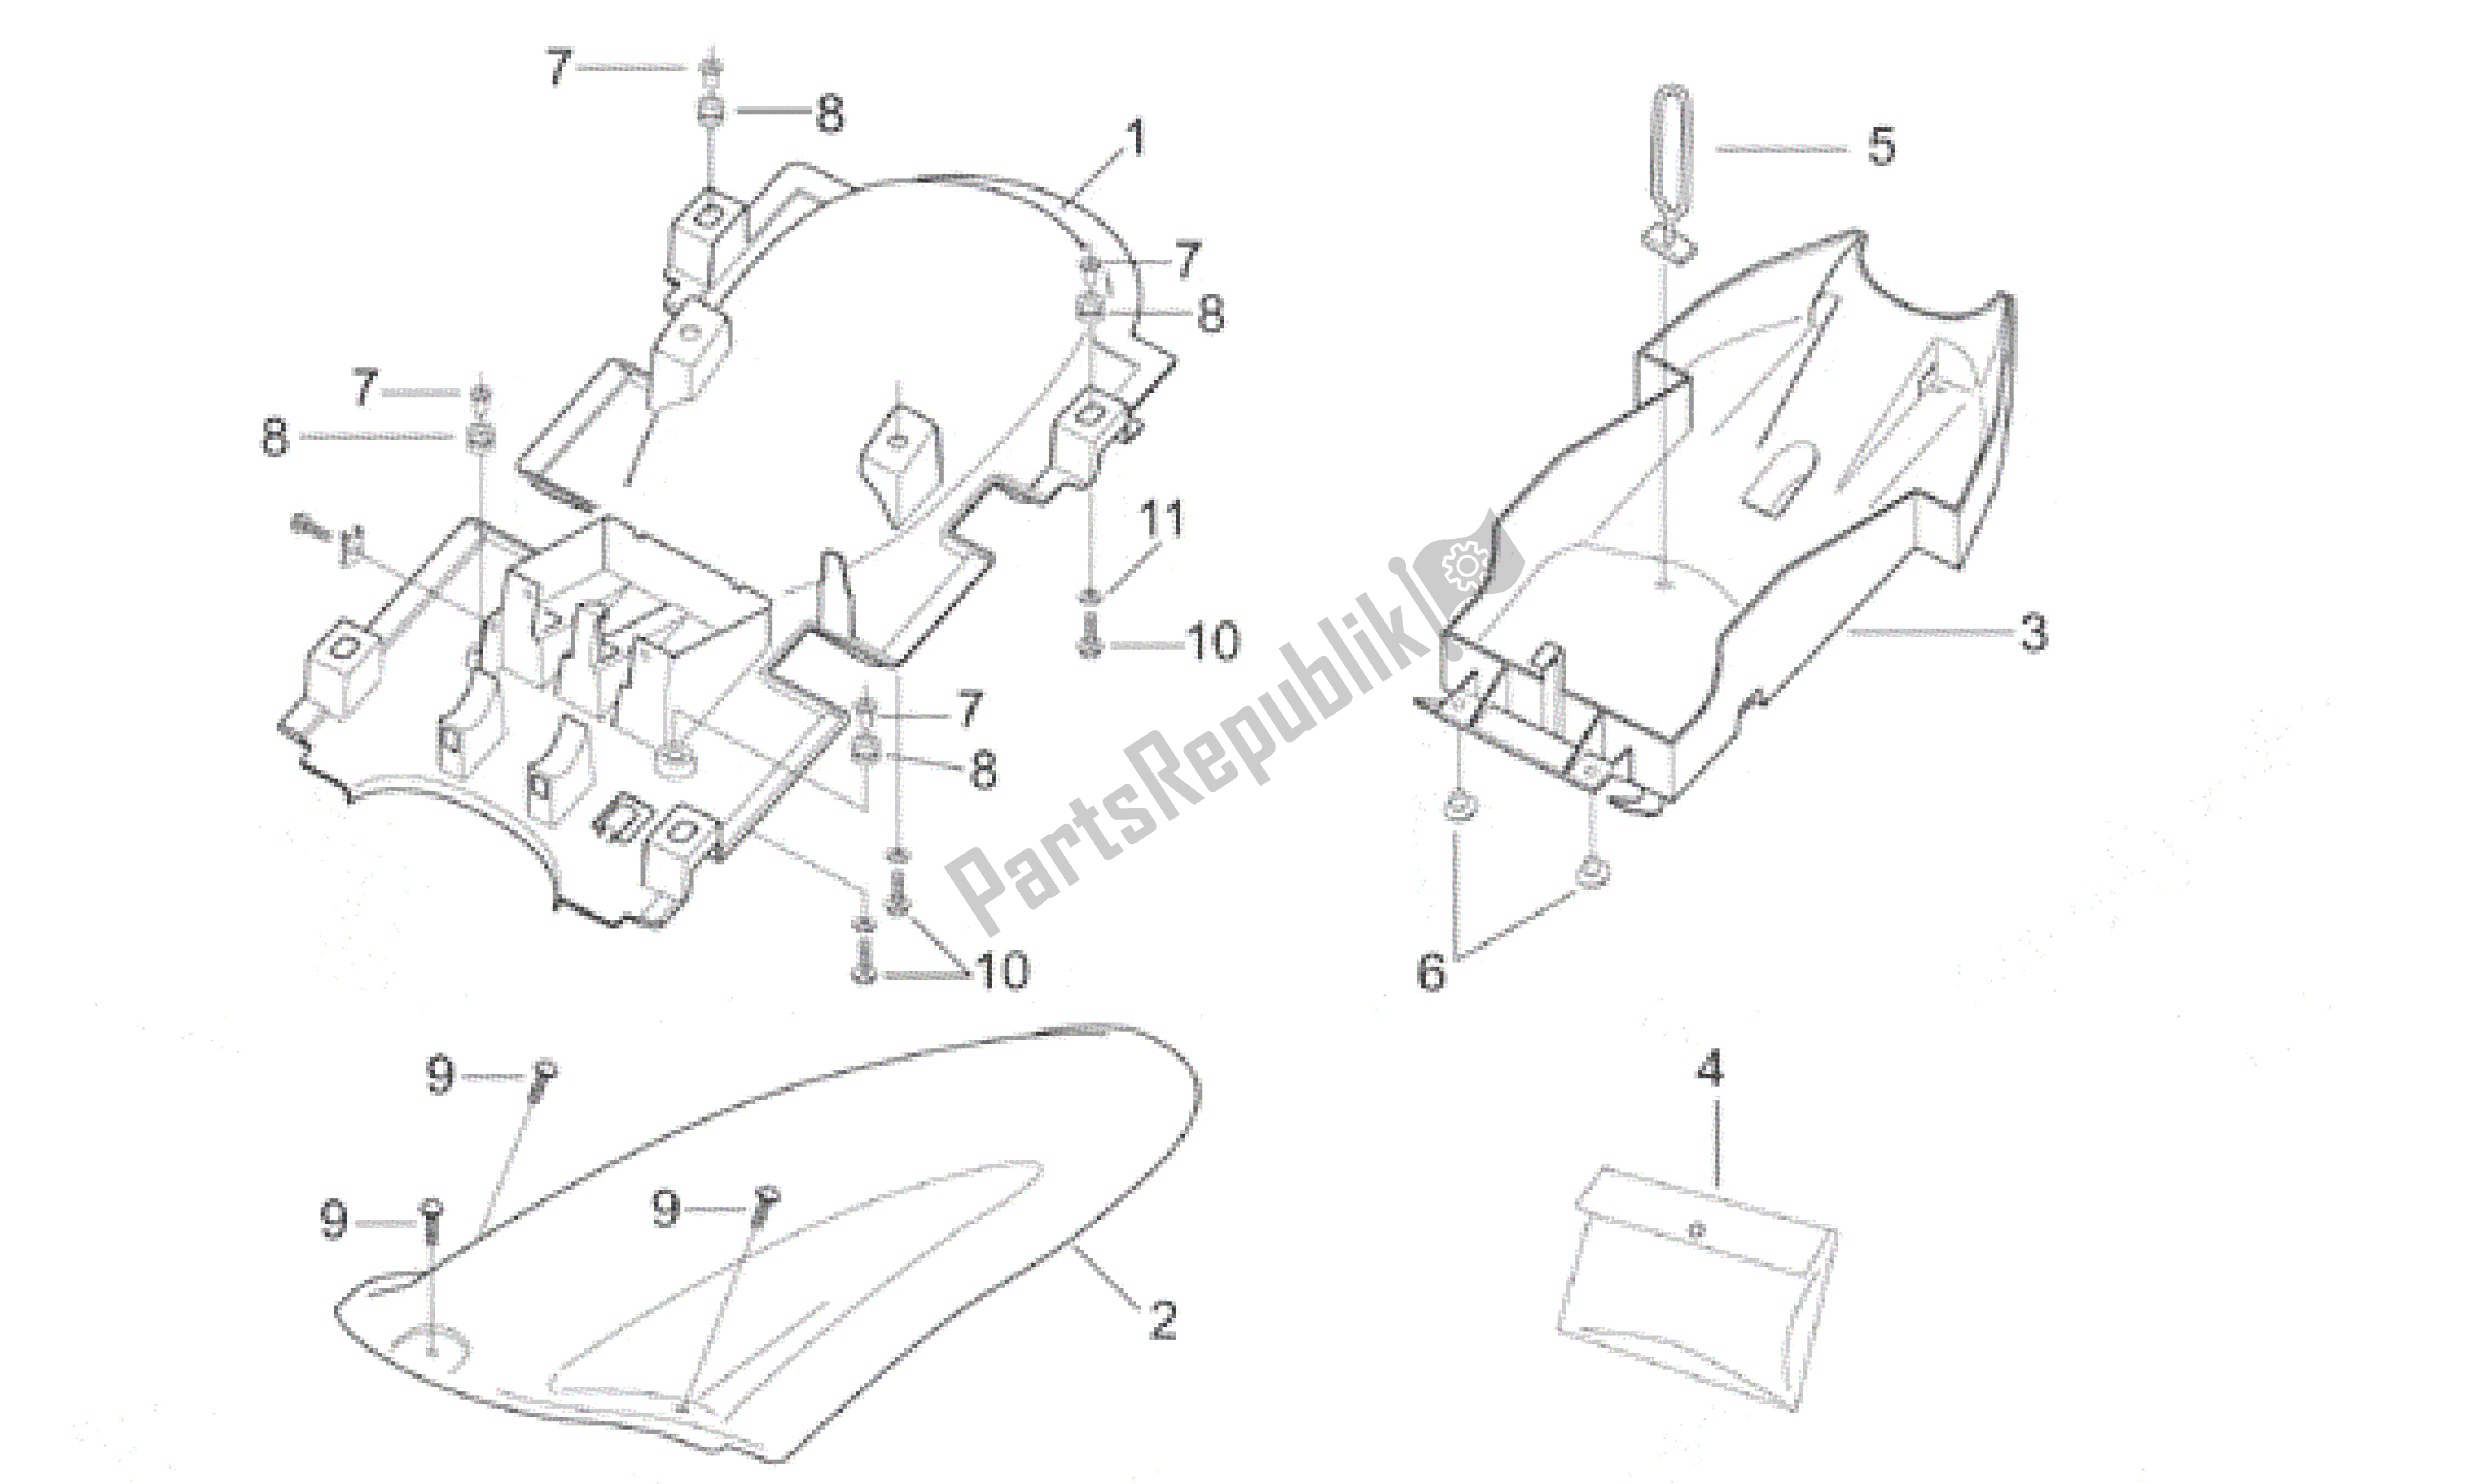 All parts for the Rear Body I of the Aprilia RS 250 1998 - 2001